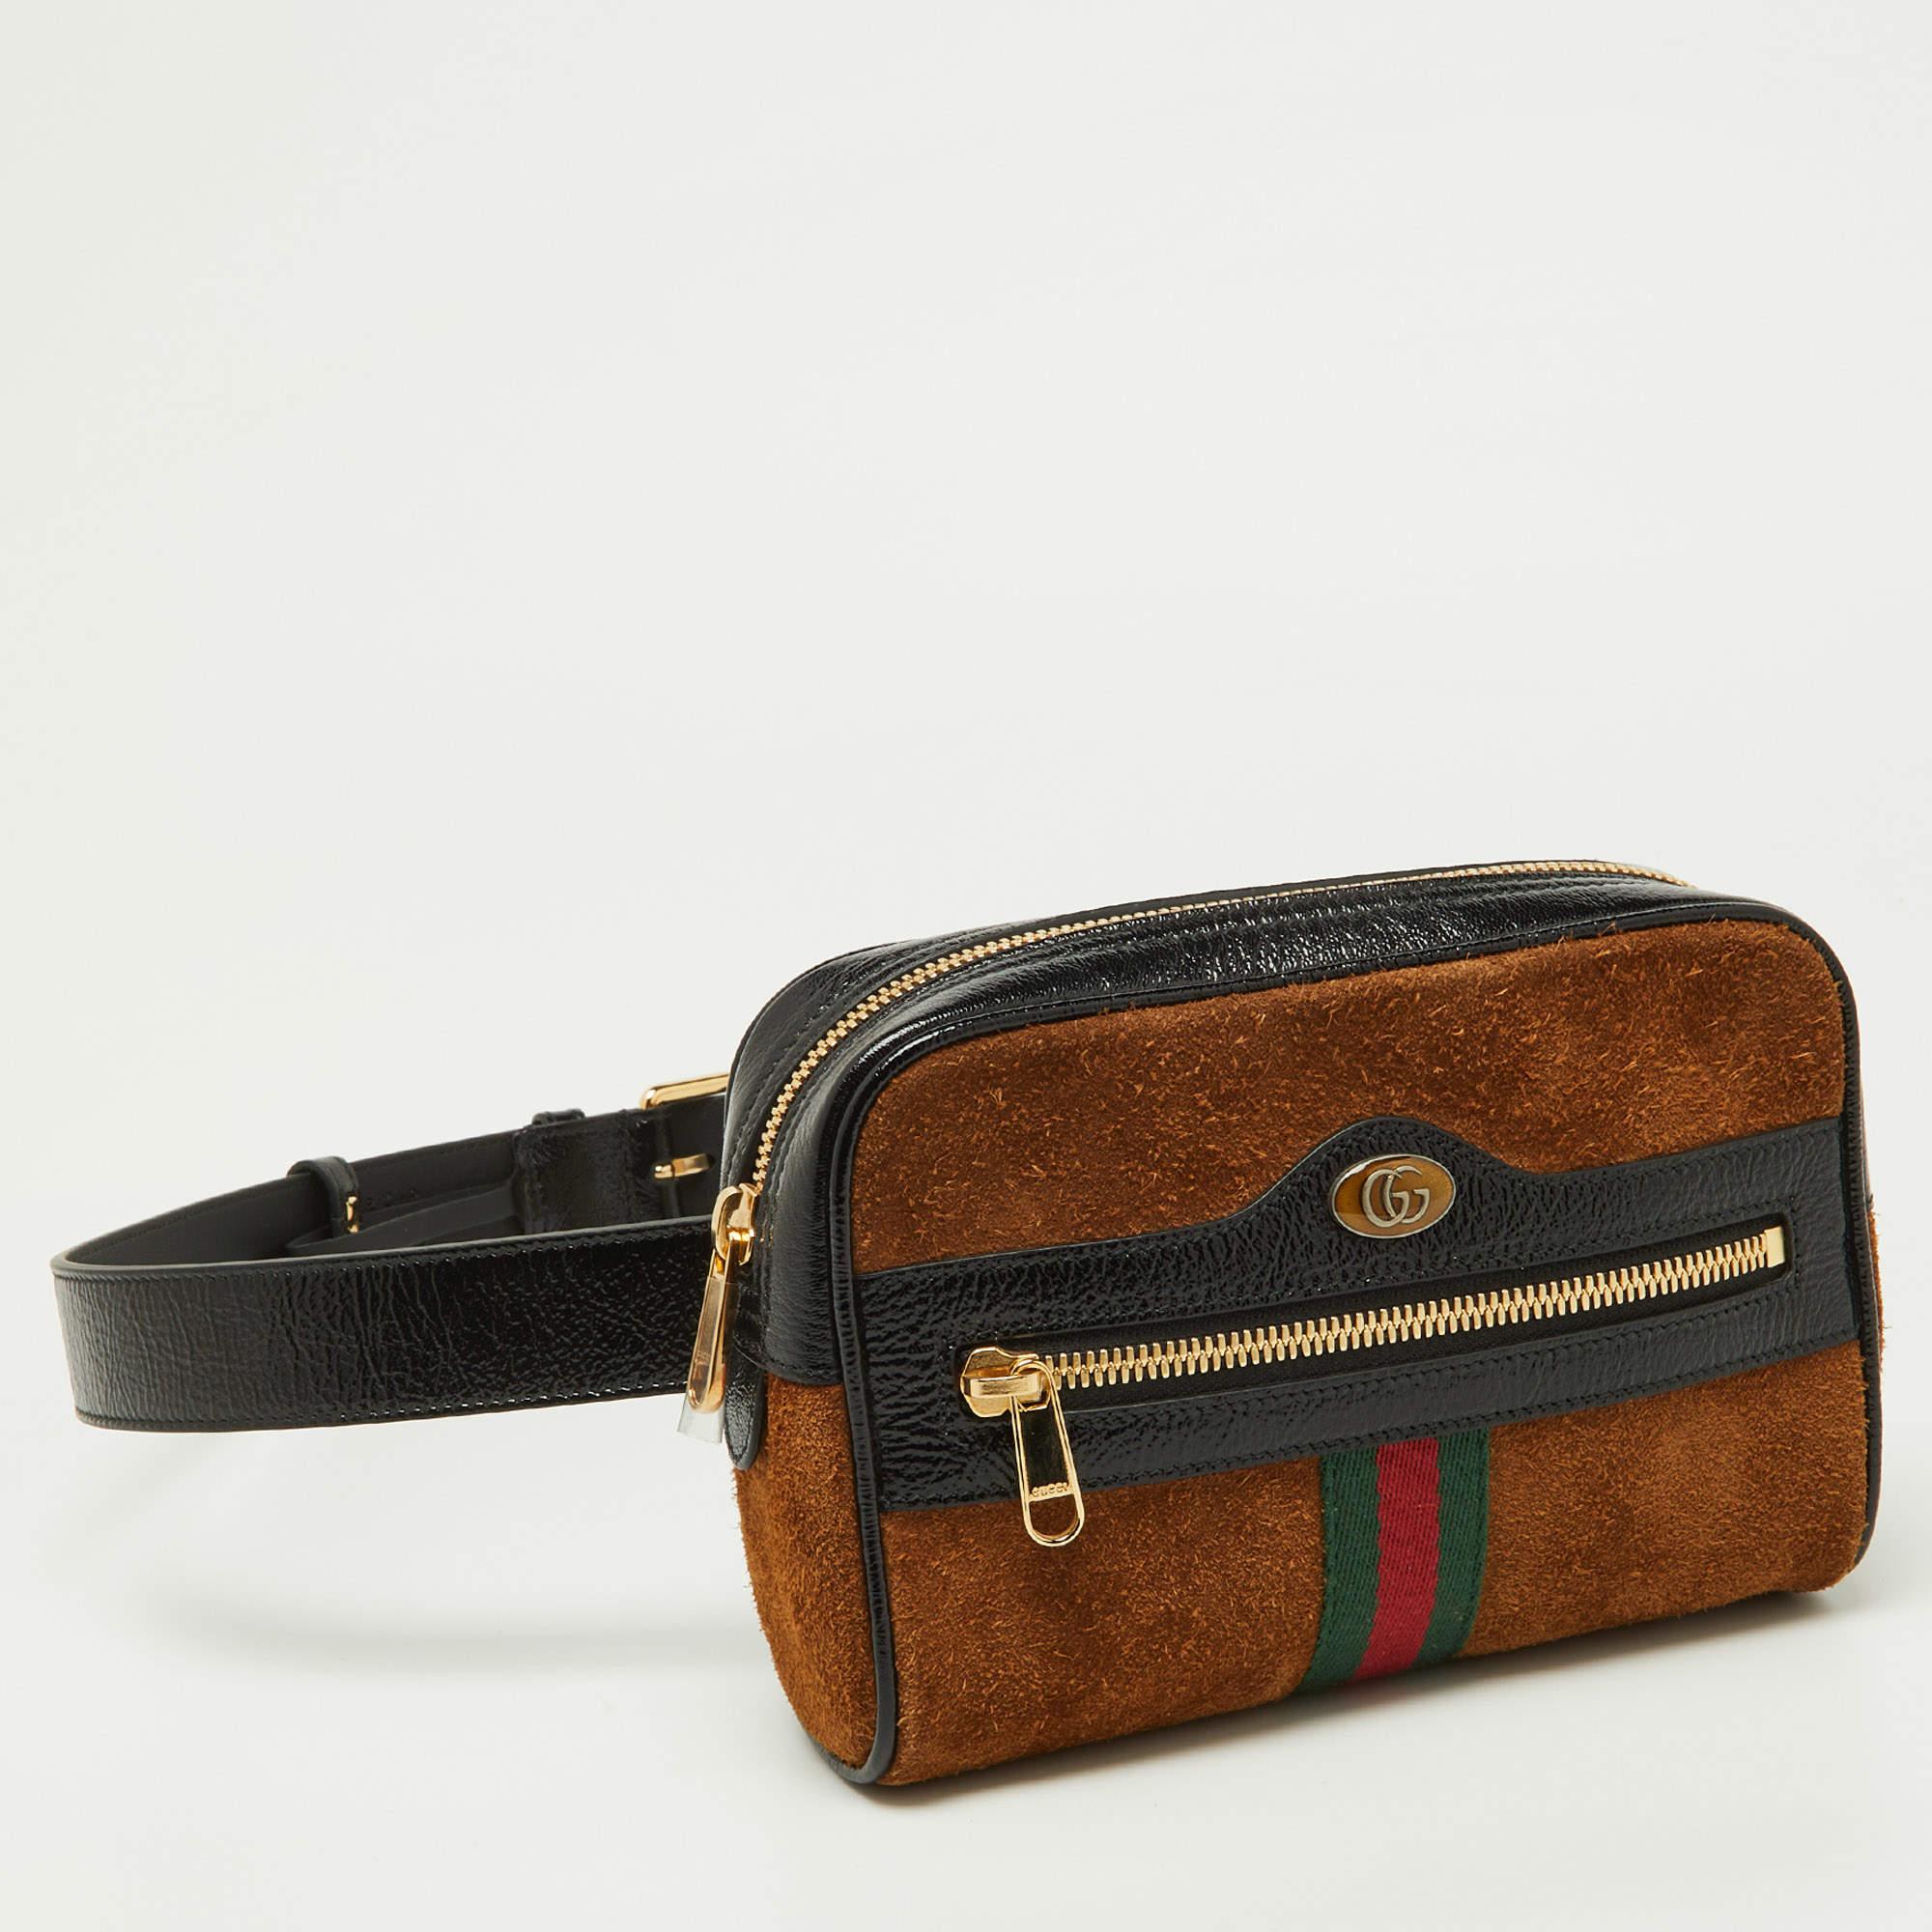 Gucci Brown/Black Suede and Patent Leather Ophidia Belt Bag In Good Condition For Sale In Dubai, Al Qouz 2